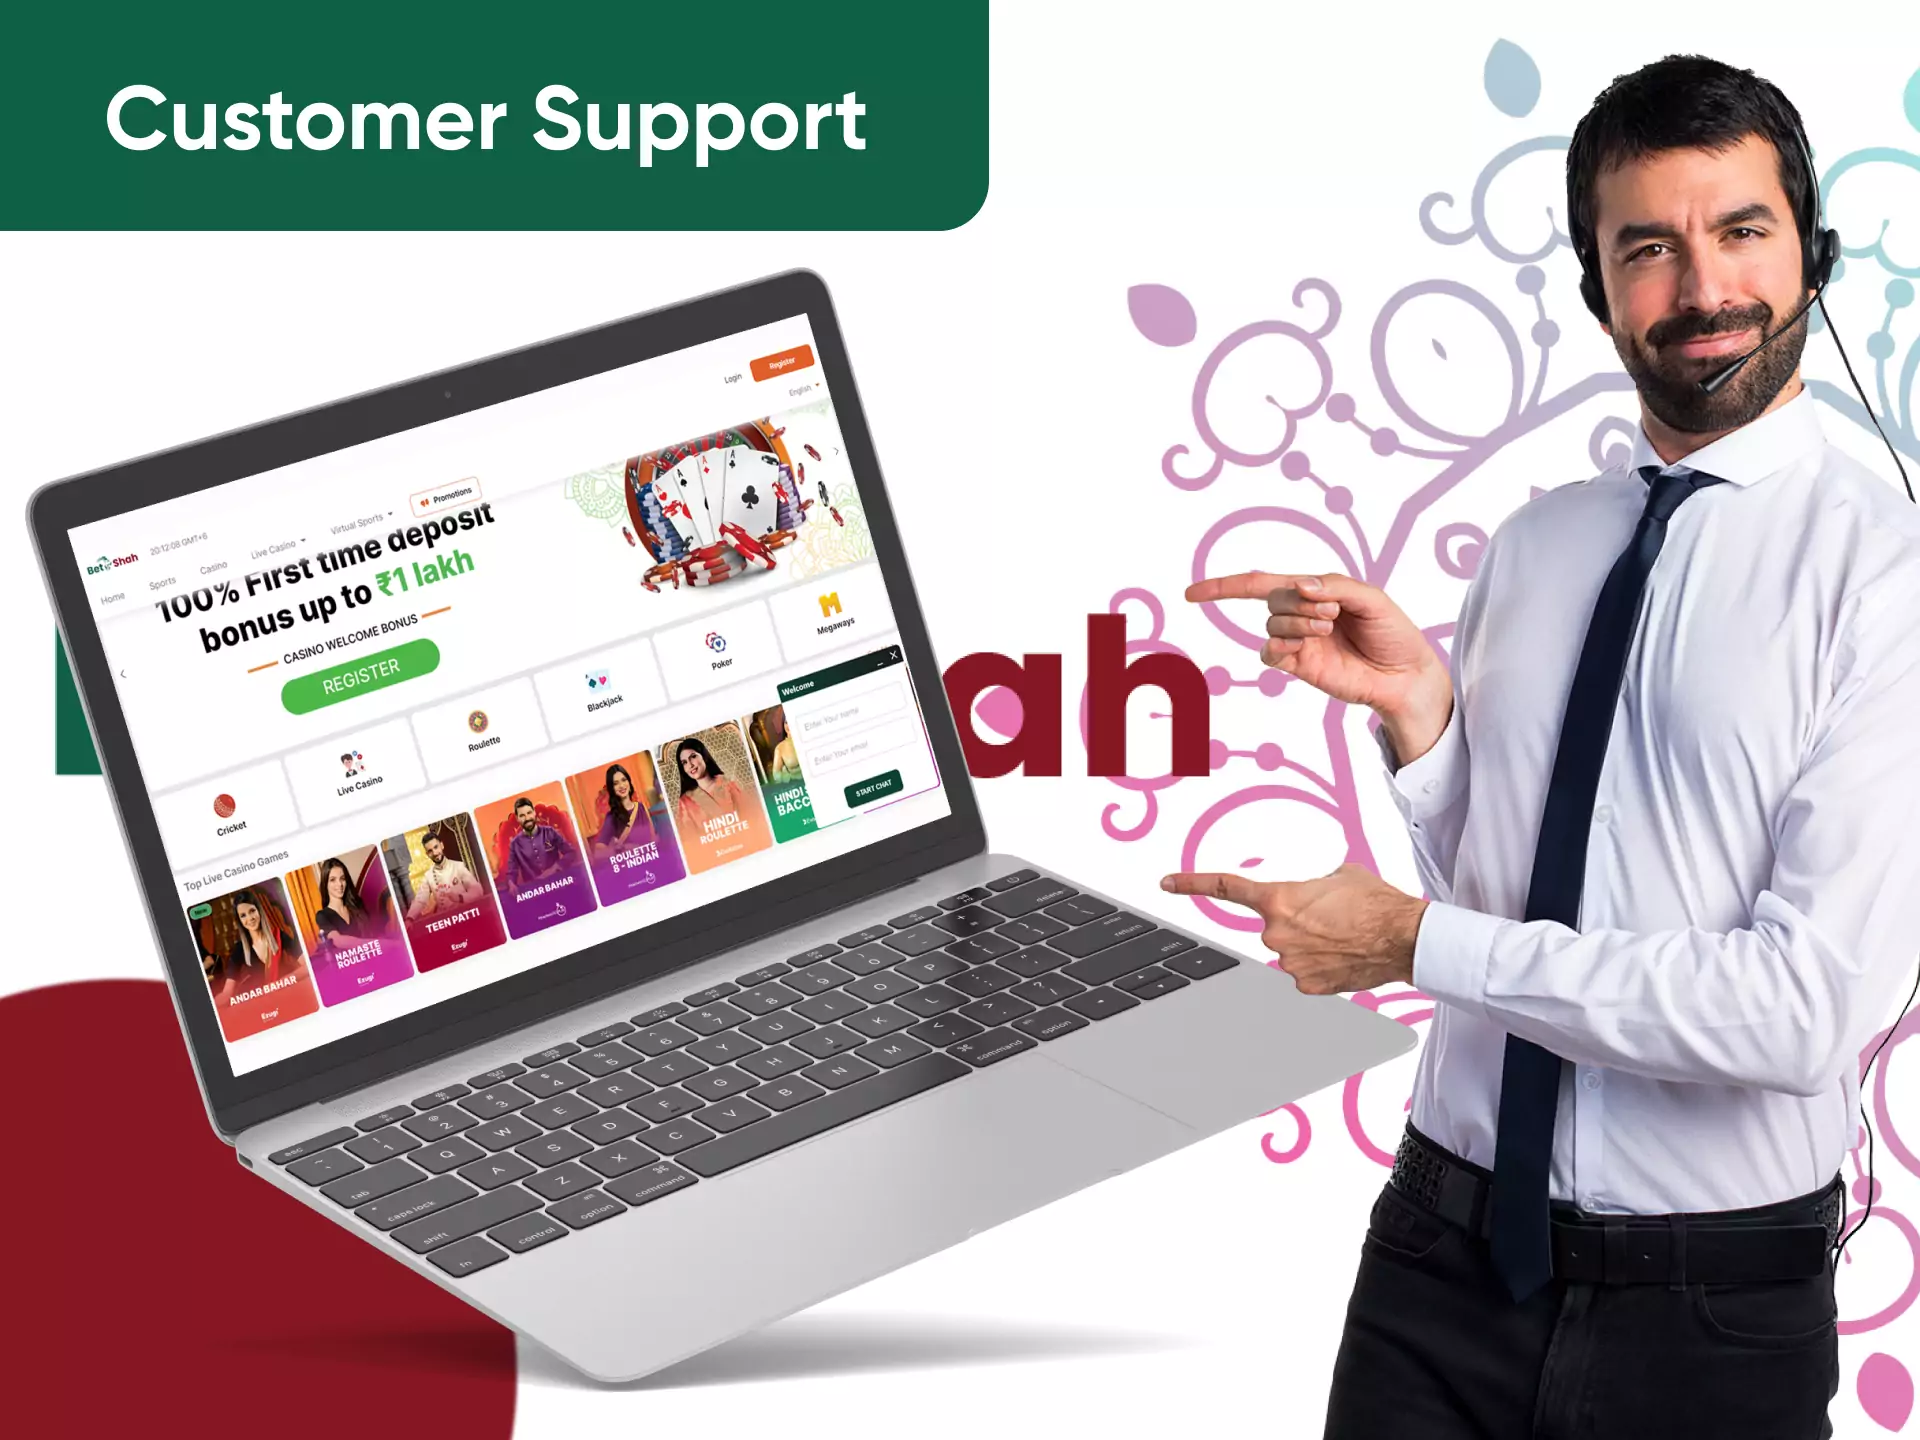 You can contact the Betshah customer team in the live chat.